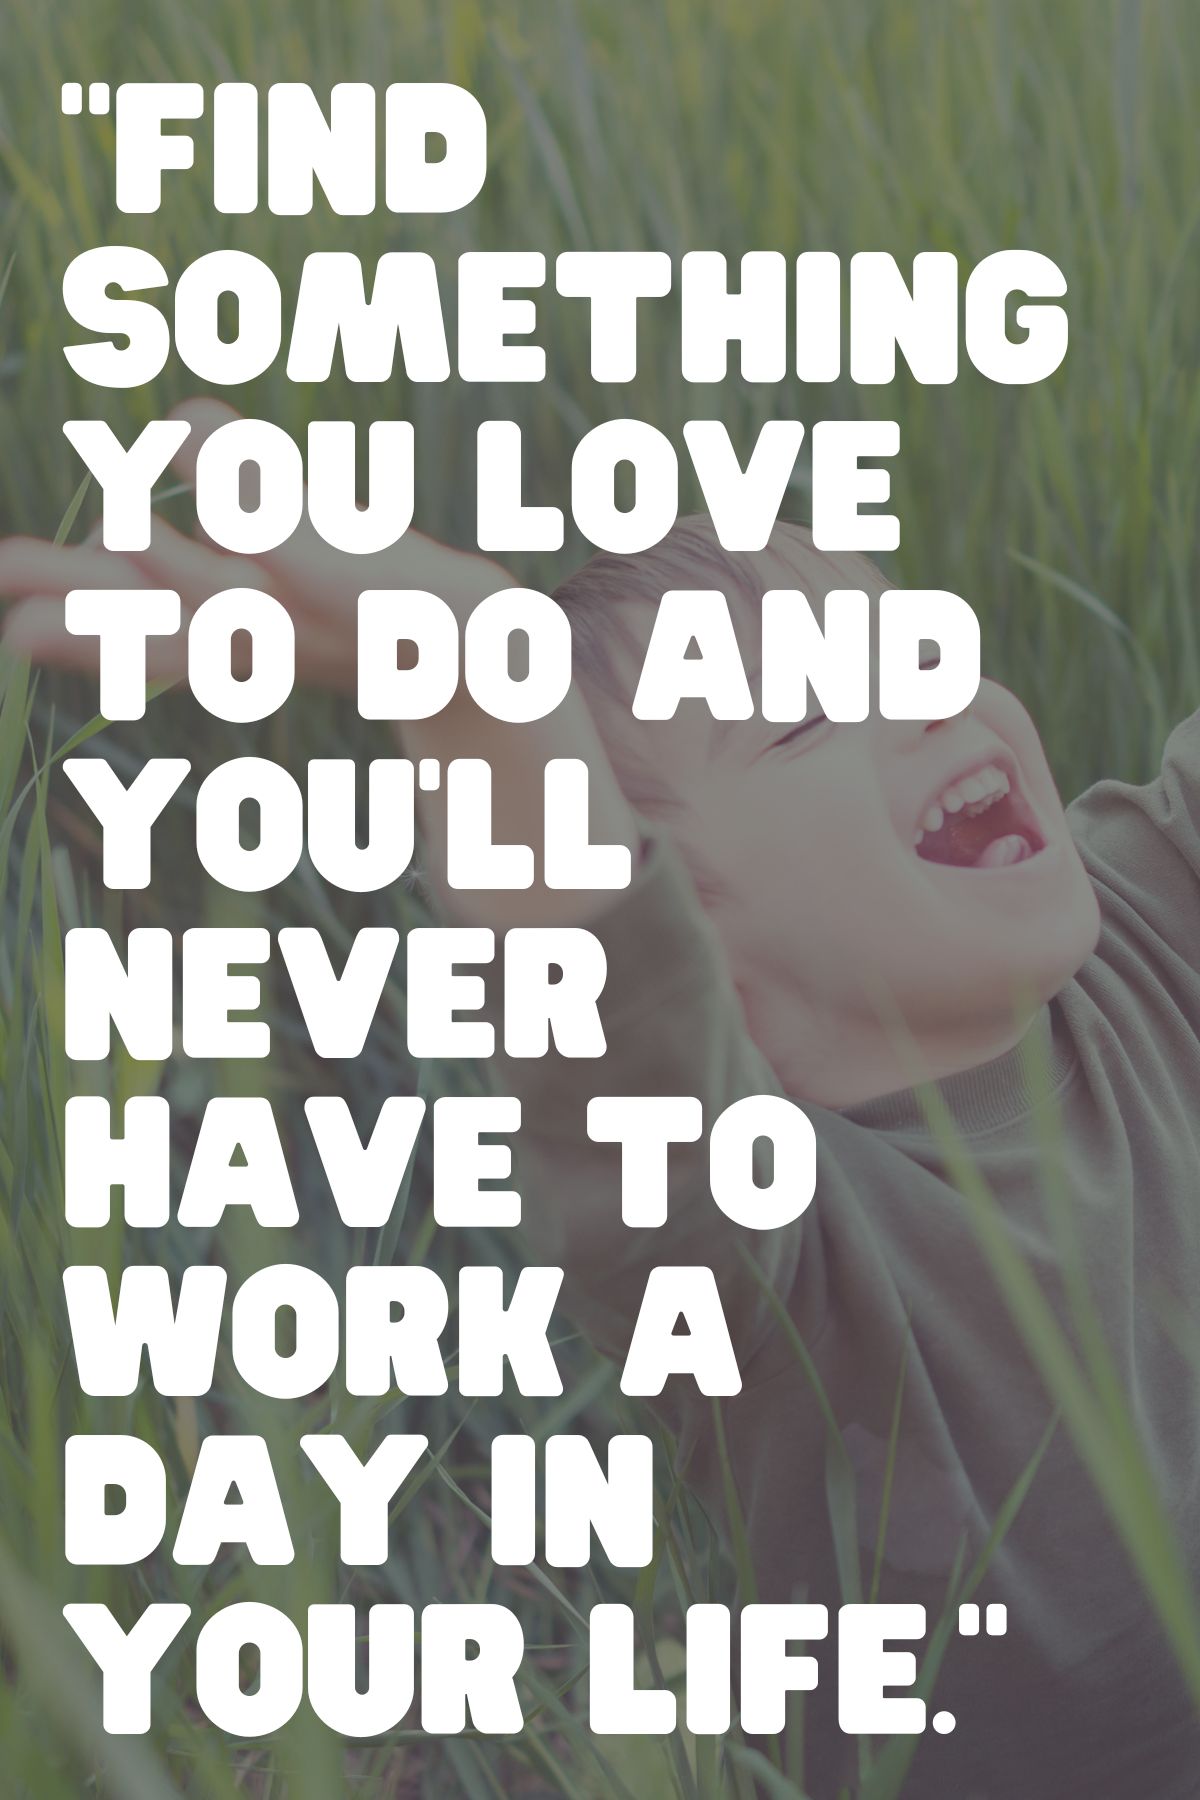 "Find something you love to do and you'll never have to work a day in your life." - Harvey MacKay